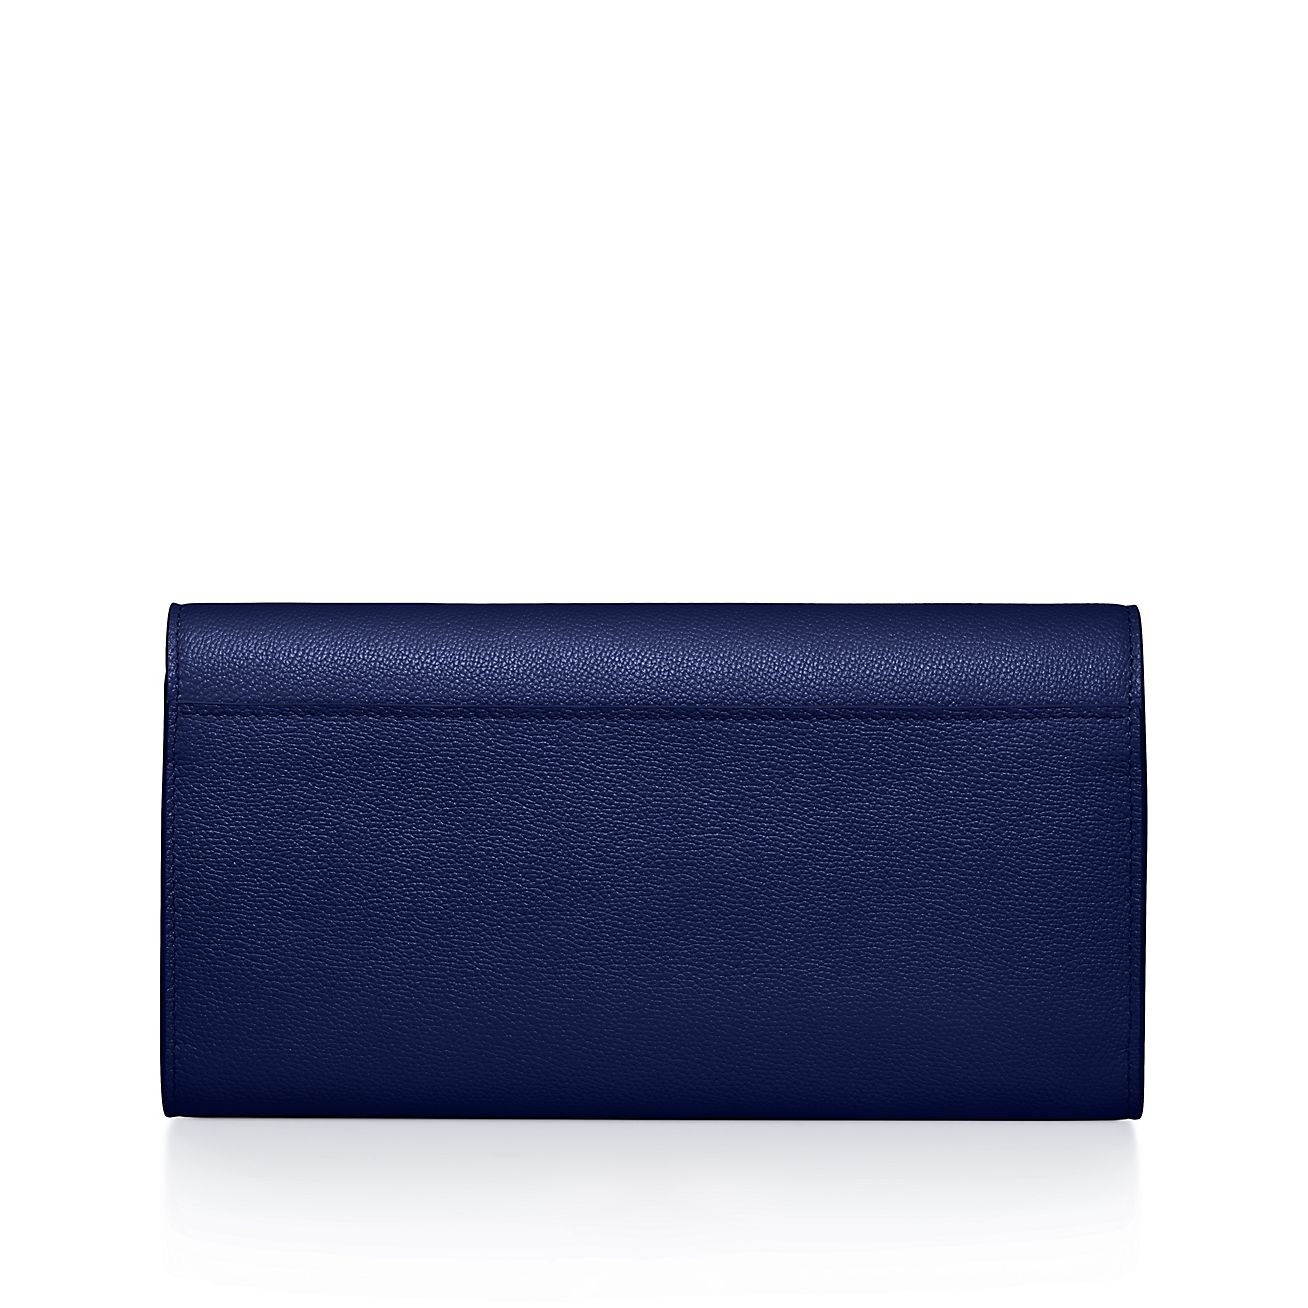 Tiffany T Deco Continental Wallet in Sapphire Blue Leather 